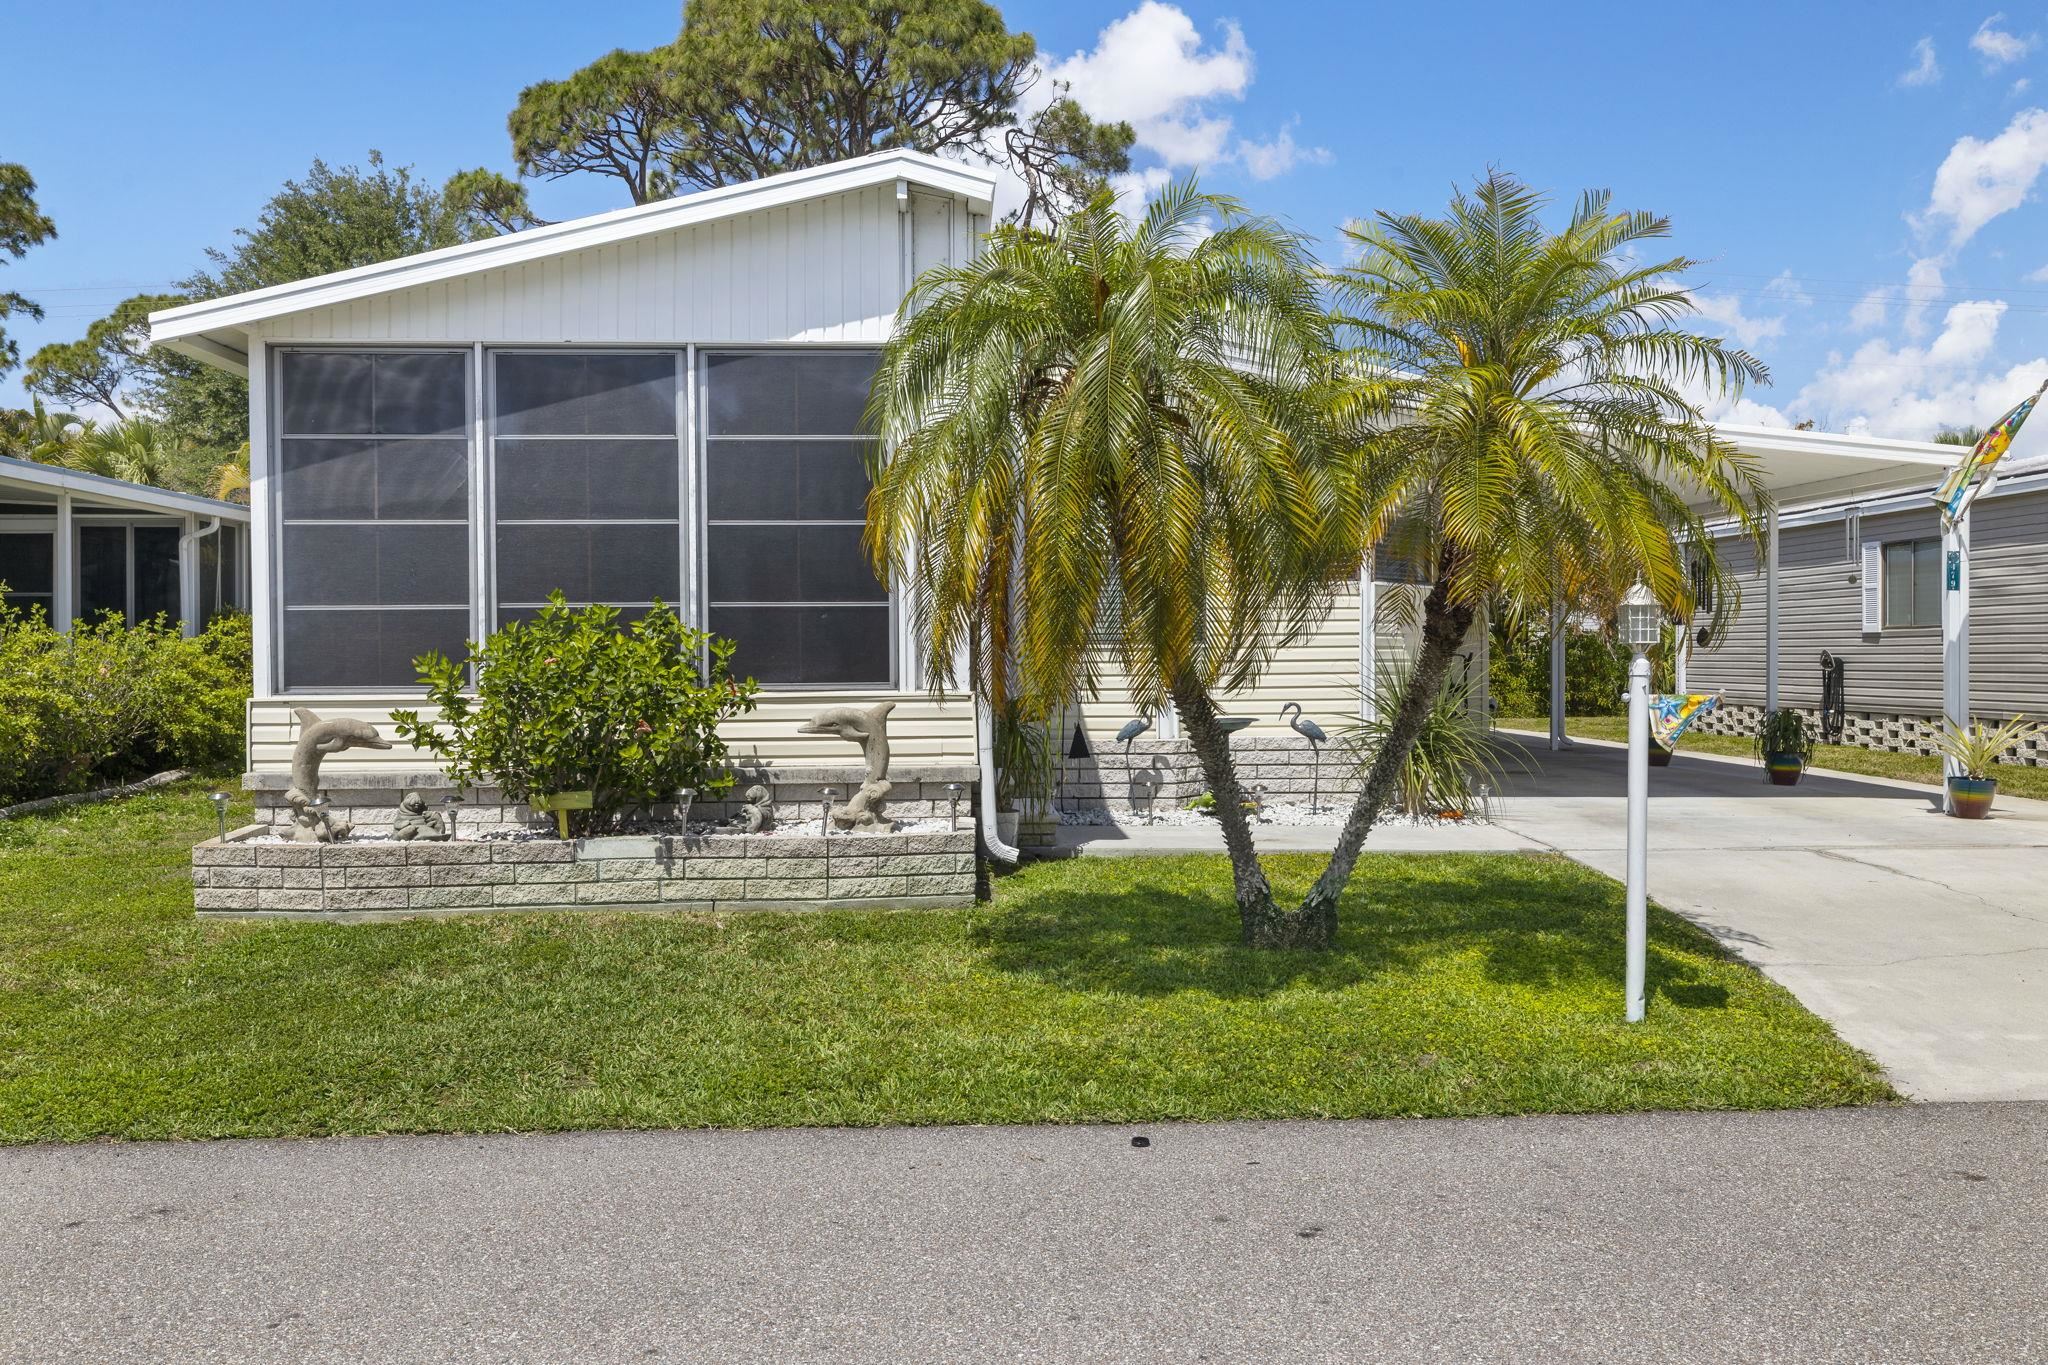 This is a fantastic chance to own a slice of paradise in the beautiful North Fort Myers, Florida. Located in the sought-after 55+ community of Old Bridge Village, this property offers an excellent opportunity for both personal use and investment purposes.  The well-maintained manufactured home features two bedrooms and two bathrooms, providing ample space for comfortable living. Situated within a gated community, you can enjoy the added peace of mind and security that comes with it.  Old Bridge Village boasts a range of private amenities exclusively available to its residents. Whether you prefer to relax by the pool, play a game of tennis, or socialize at the clubhouse, there is something for everyone here. Additionally, the marina offers a boating community with convenient gulf access to boat slips, perfect for water enthusiasts. Palm Point is also accessible to residents only, to enjoy fun activities like fishing, corn hole, grilling or other fun outside activities with a water view.   This property remained undamaged during Hurricane Ian, showcasing its resilience and durability.  The manufactured home itself is in pristine condition, ensuring a move-in ready experience. It's difficult to fully capture the charm and beauty of this opportunity, so don't miss out on the chance to own your own piece of paradise in North Fort Myers, Florida.